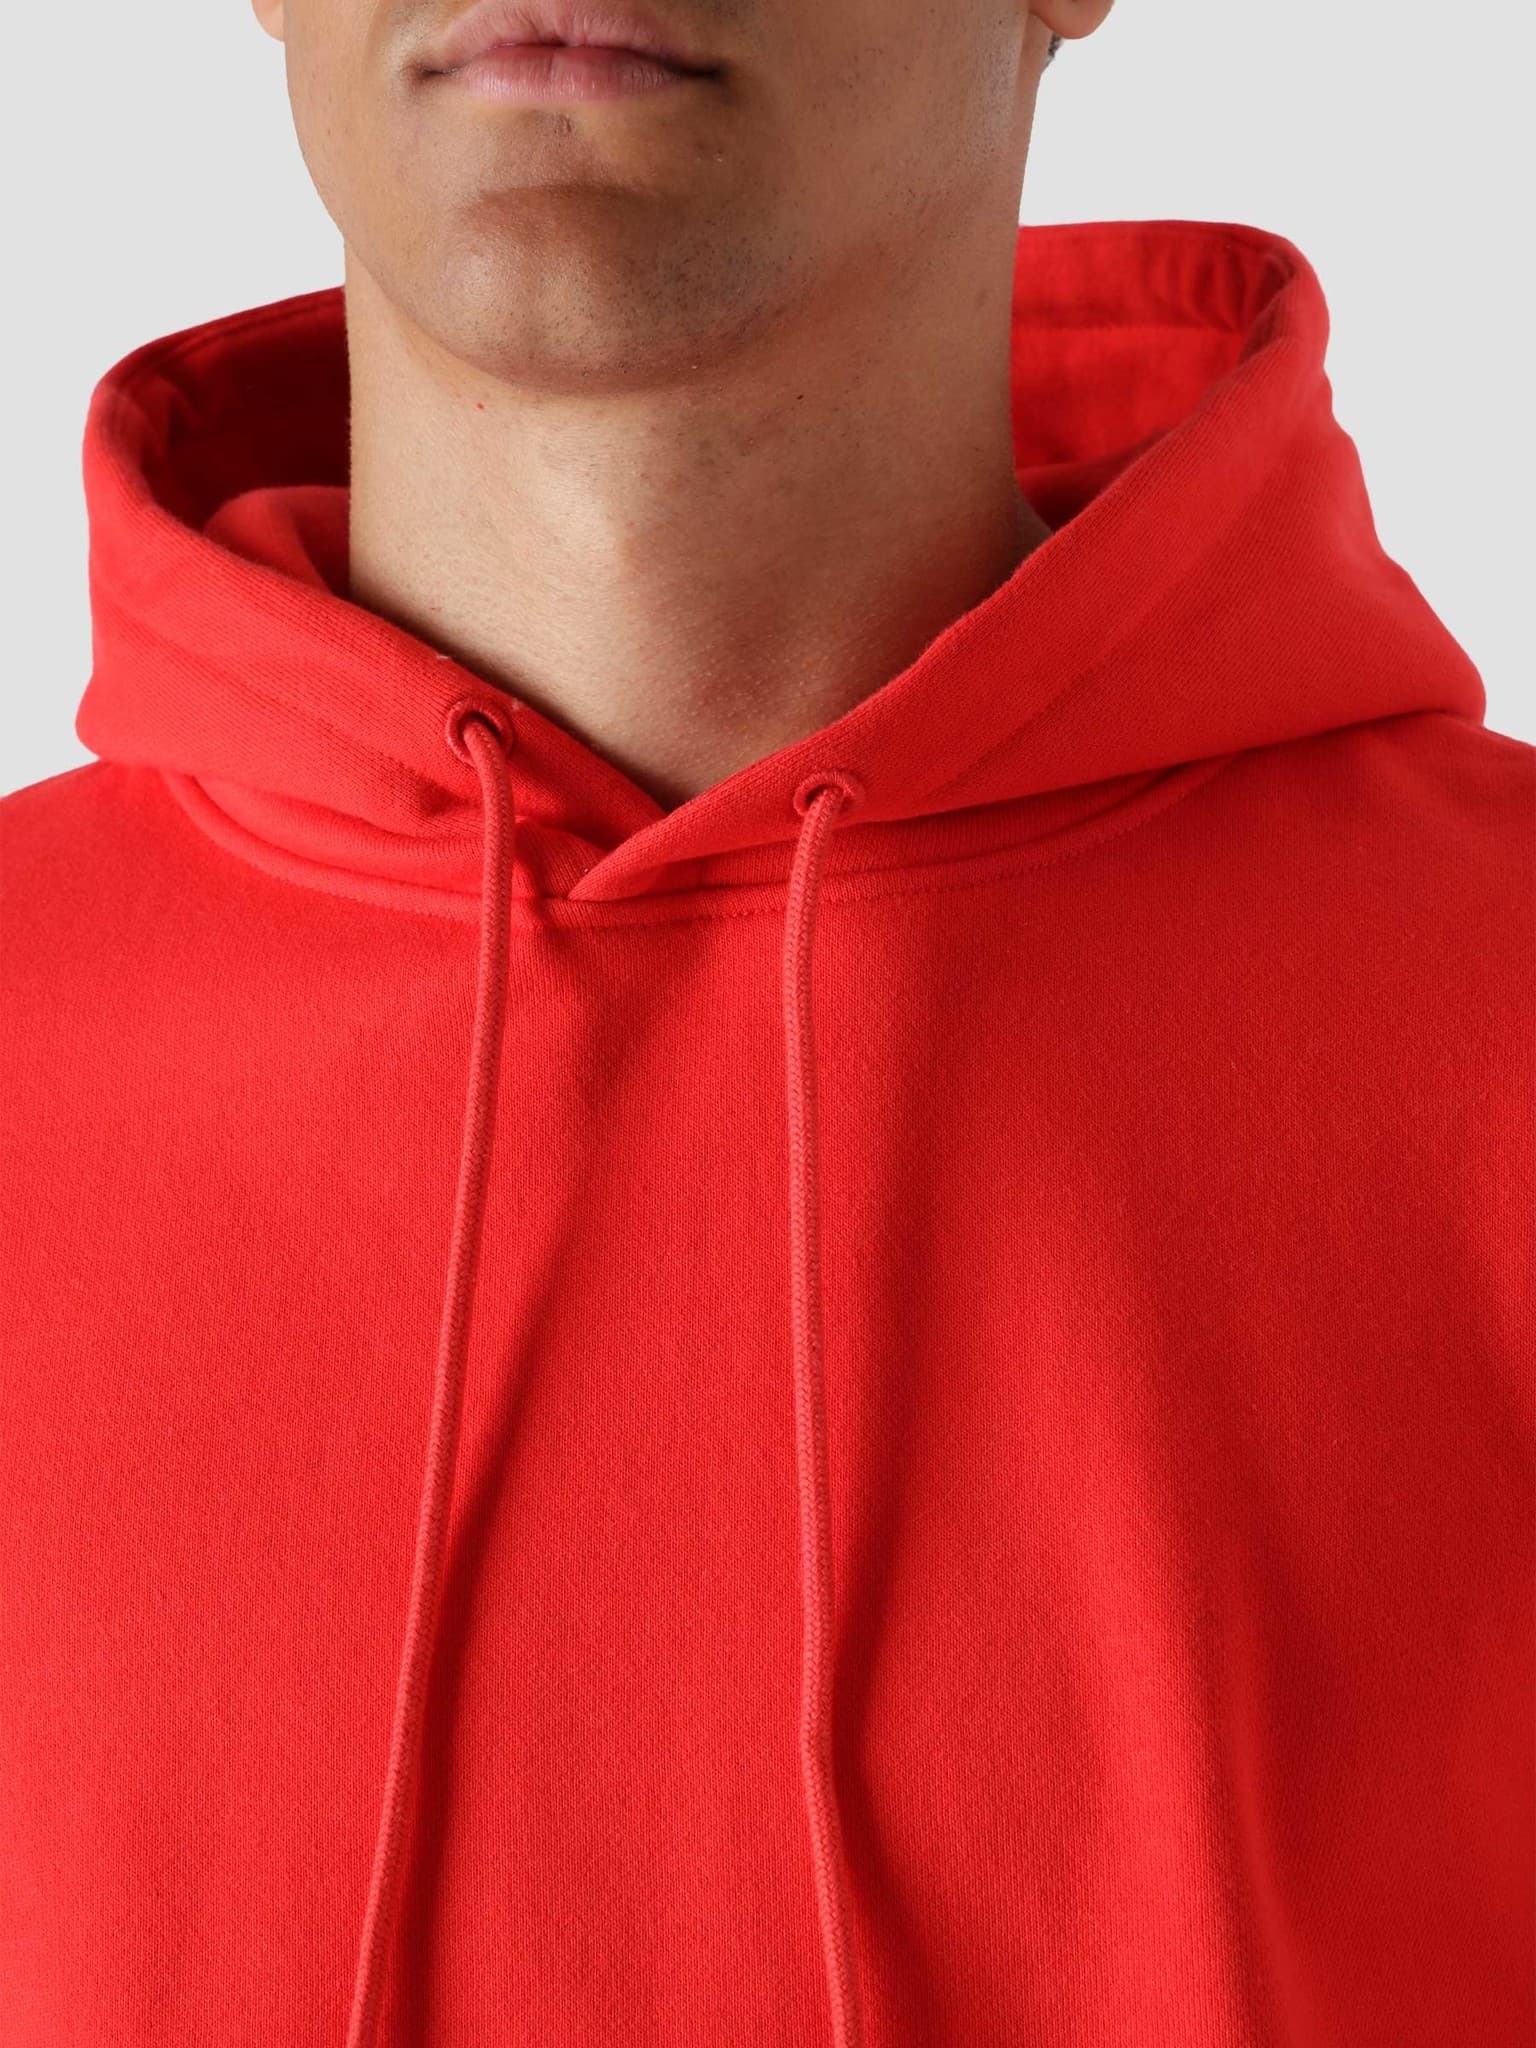 Captain Hoodie Red NOST34